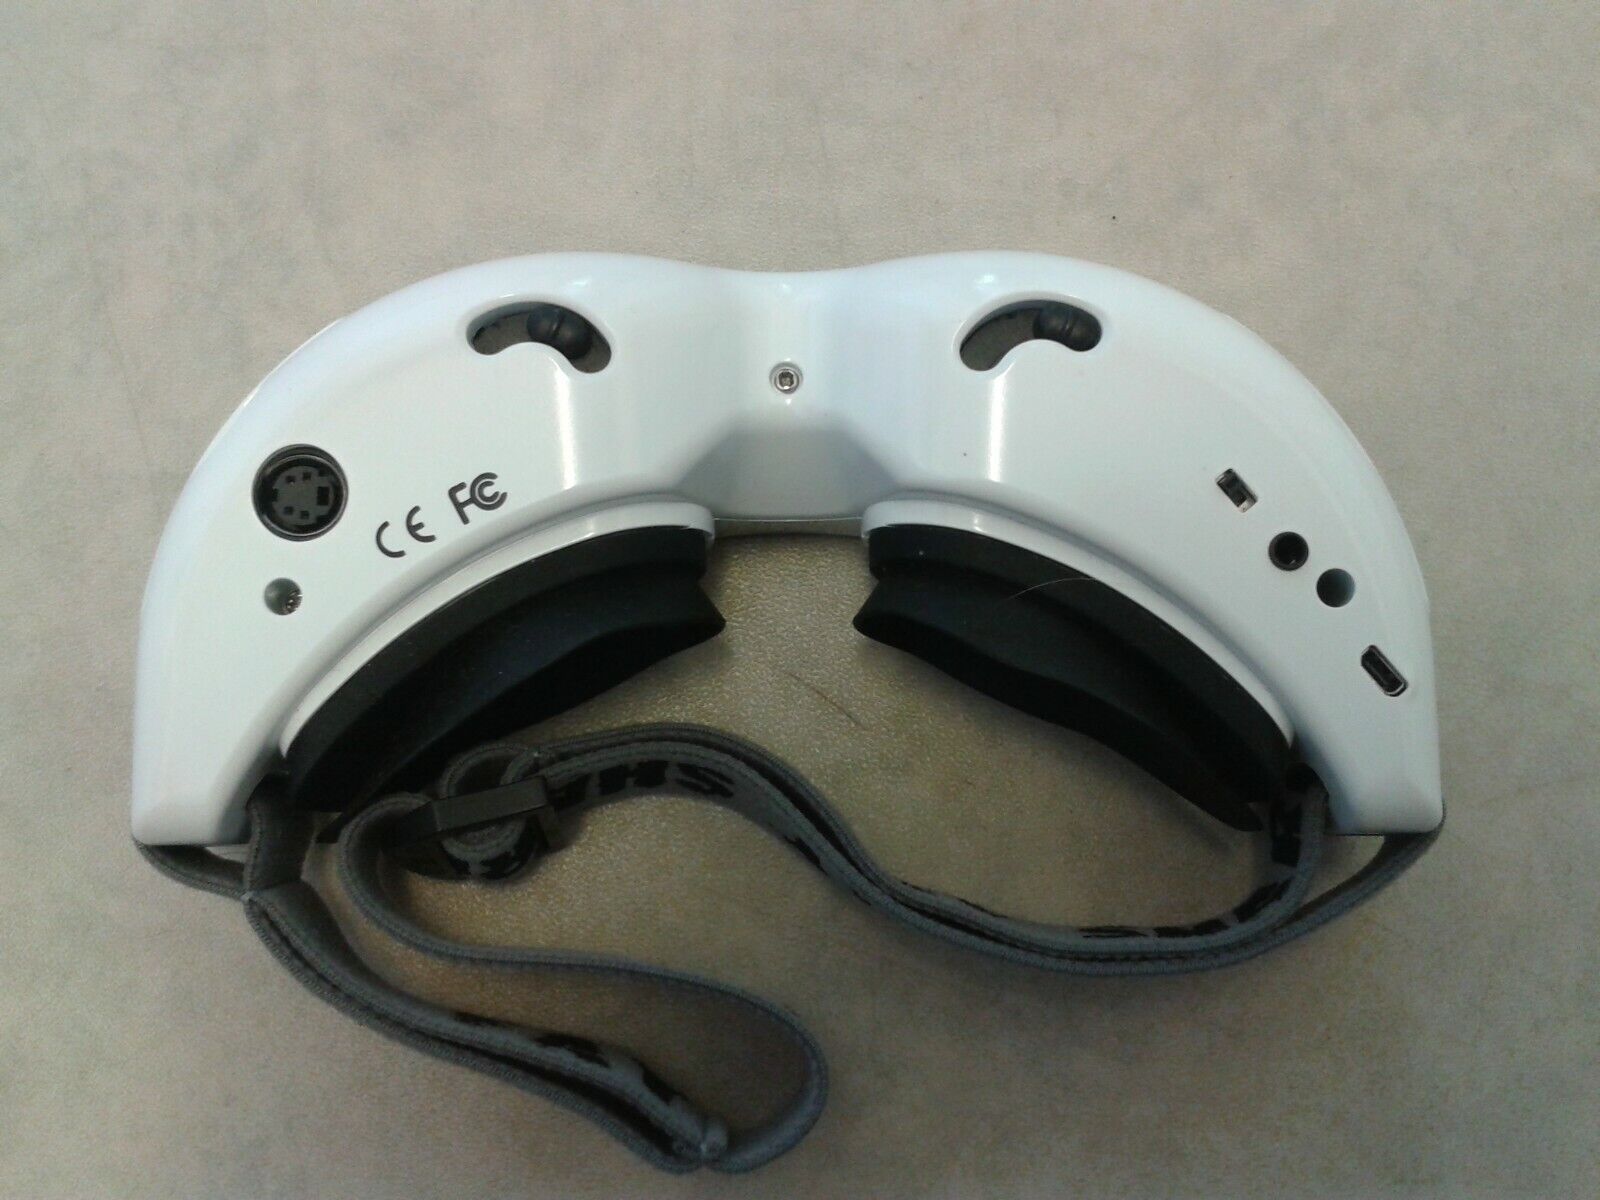 HD FPV Goggles with 5.8GHz Receiver